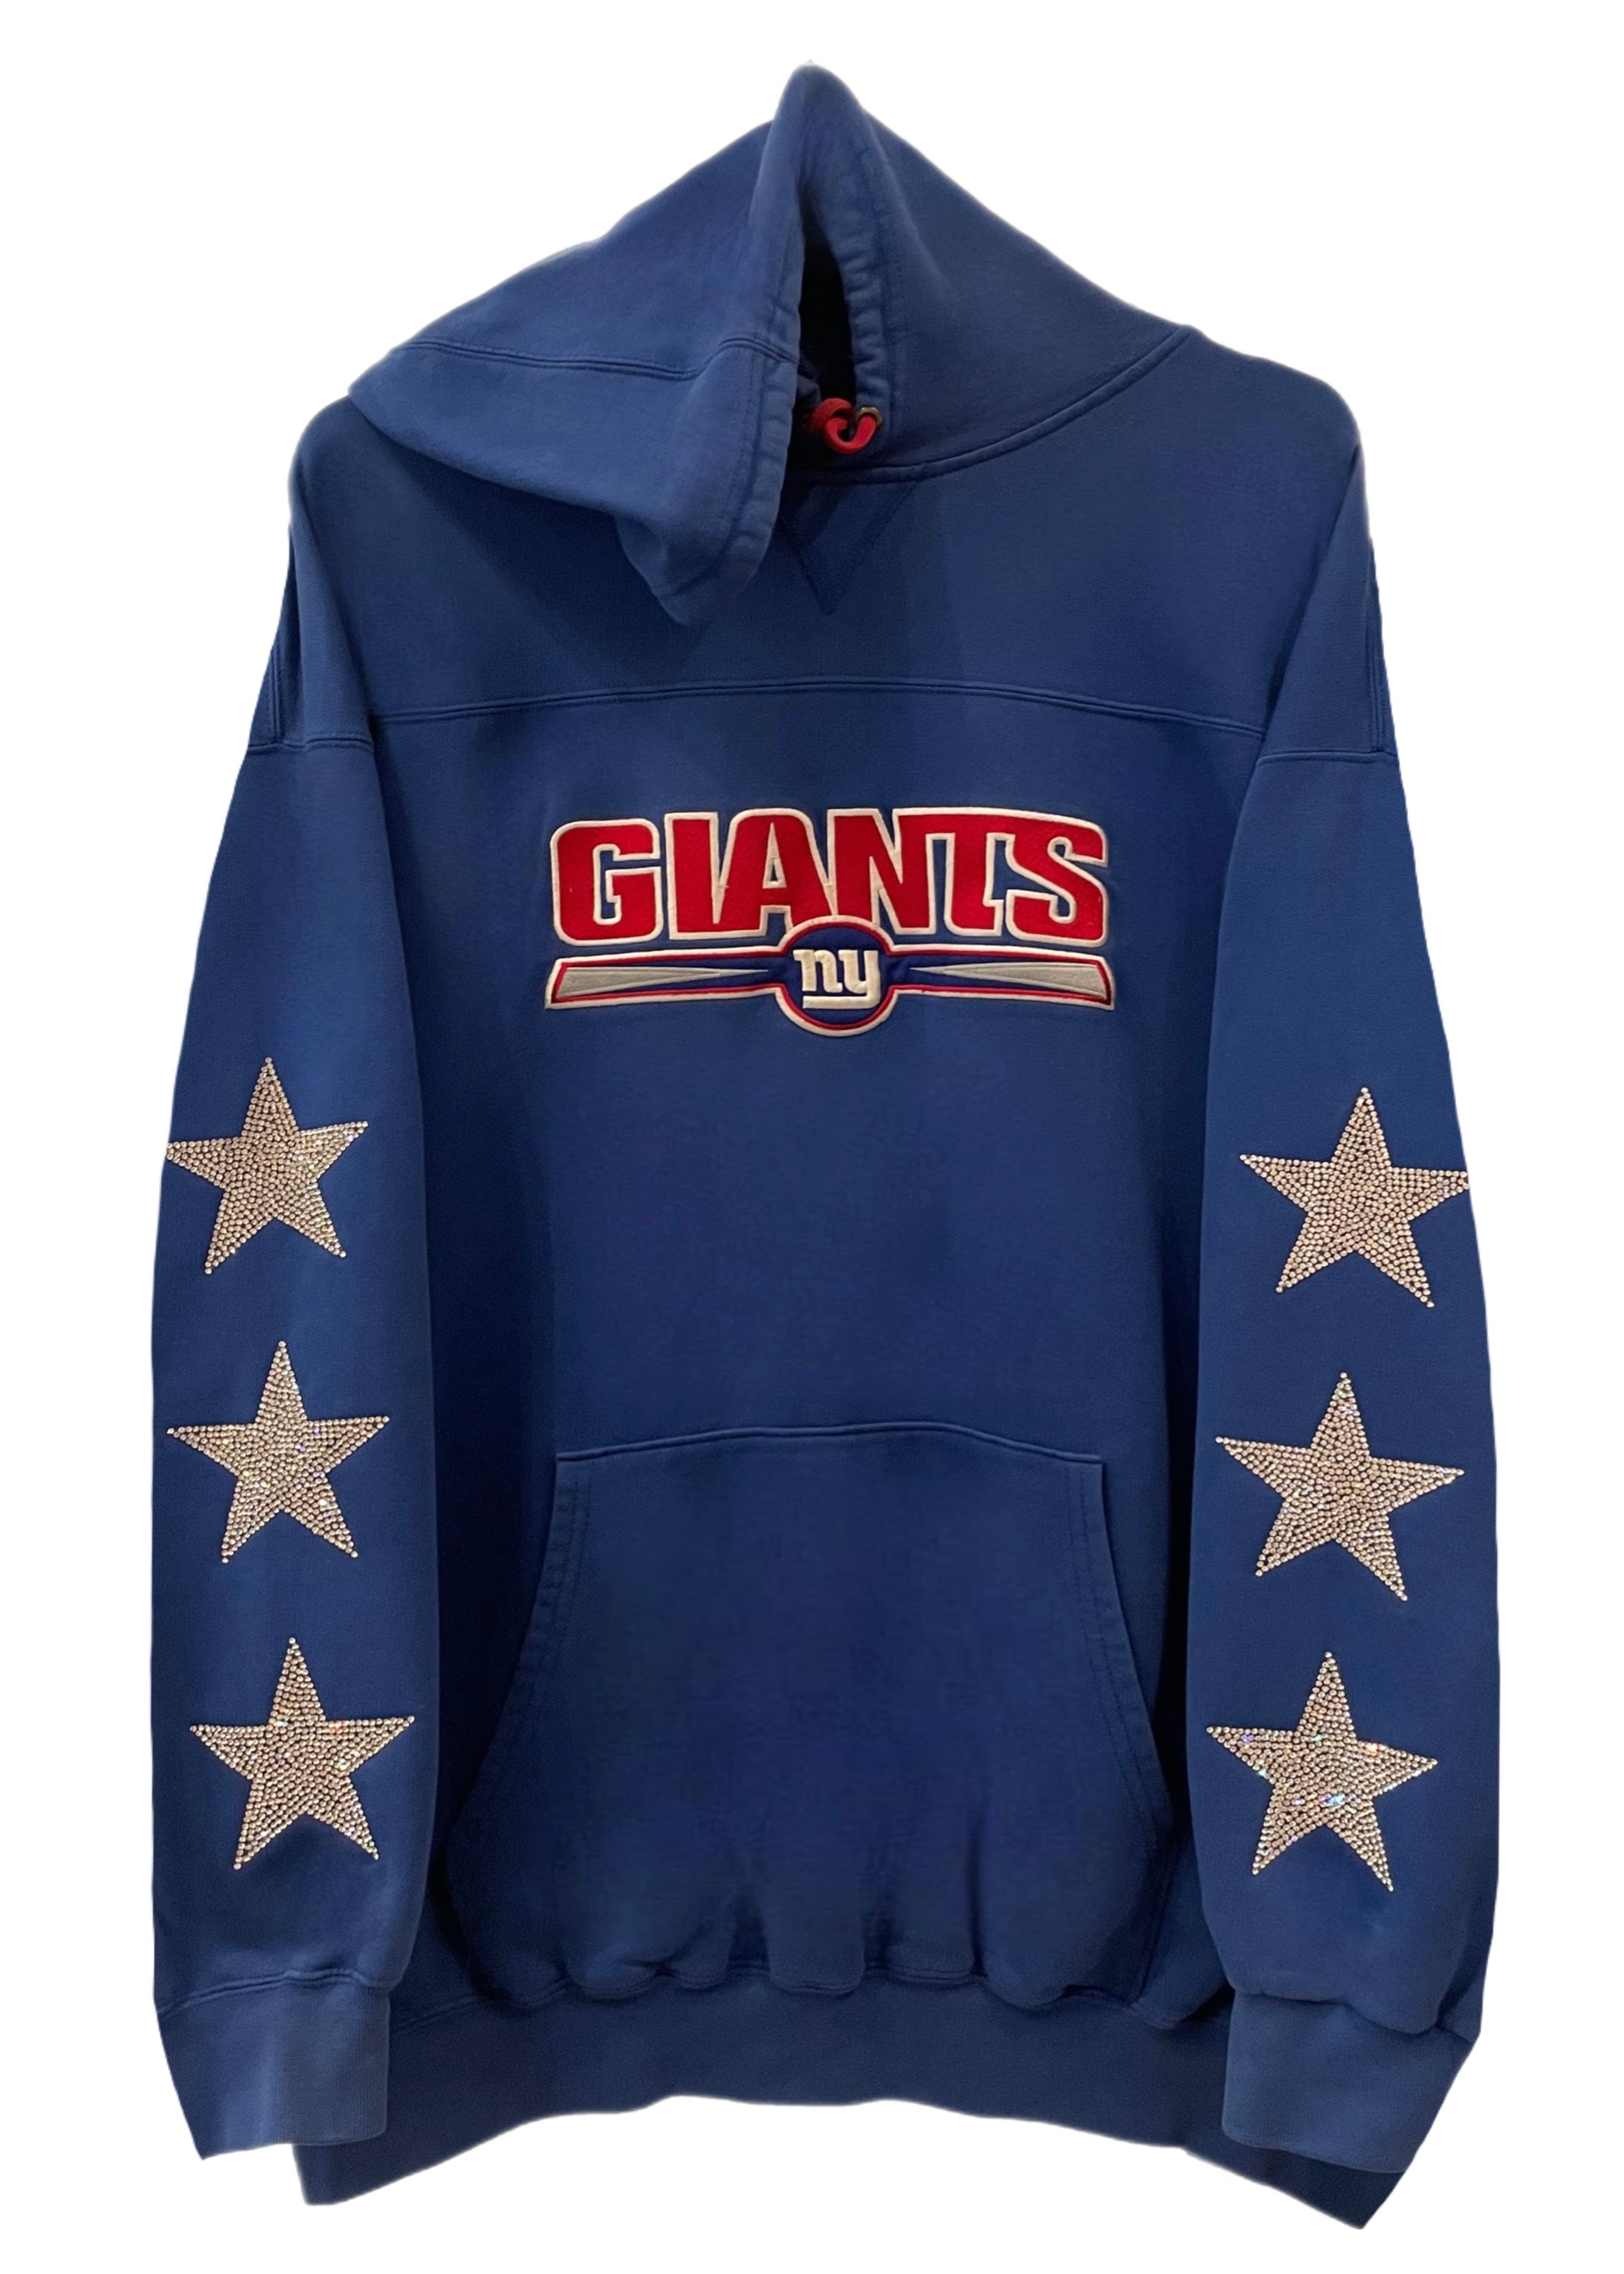 NY Giants, NFL One of a KIND Vintage Hoodie with Crystal Star